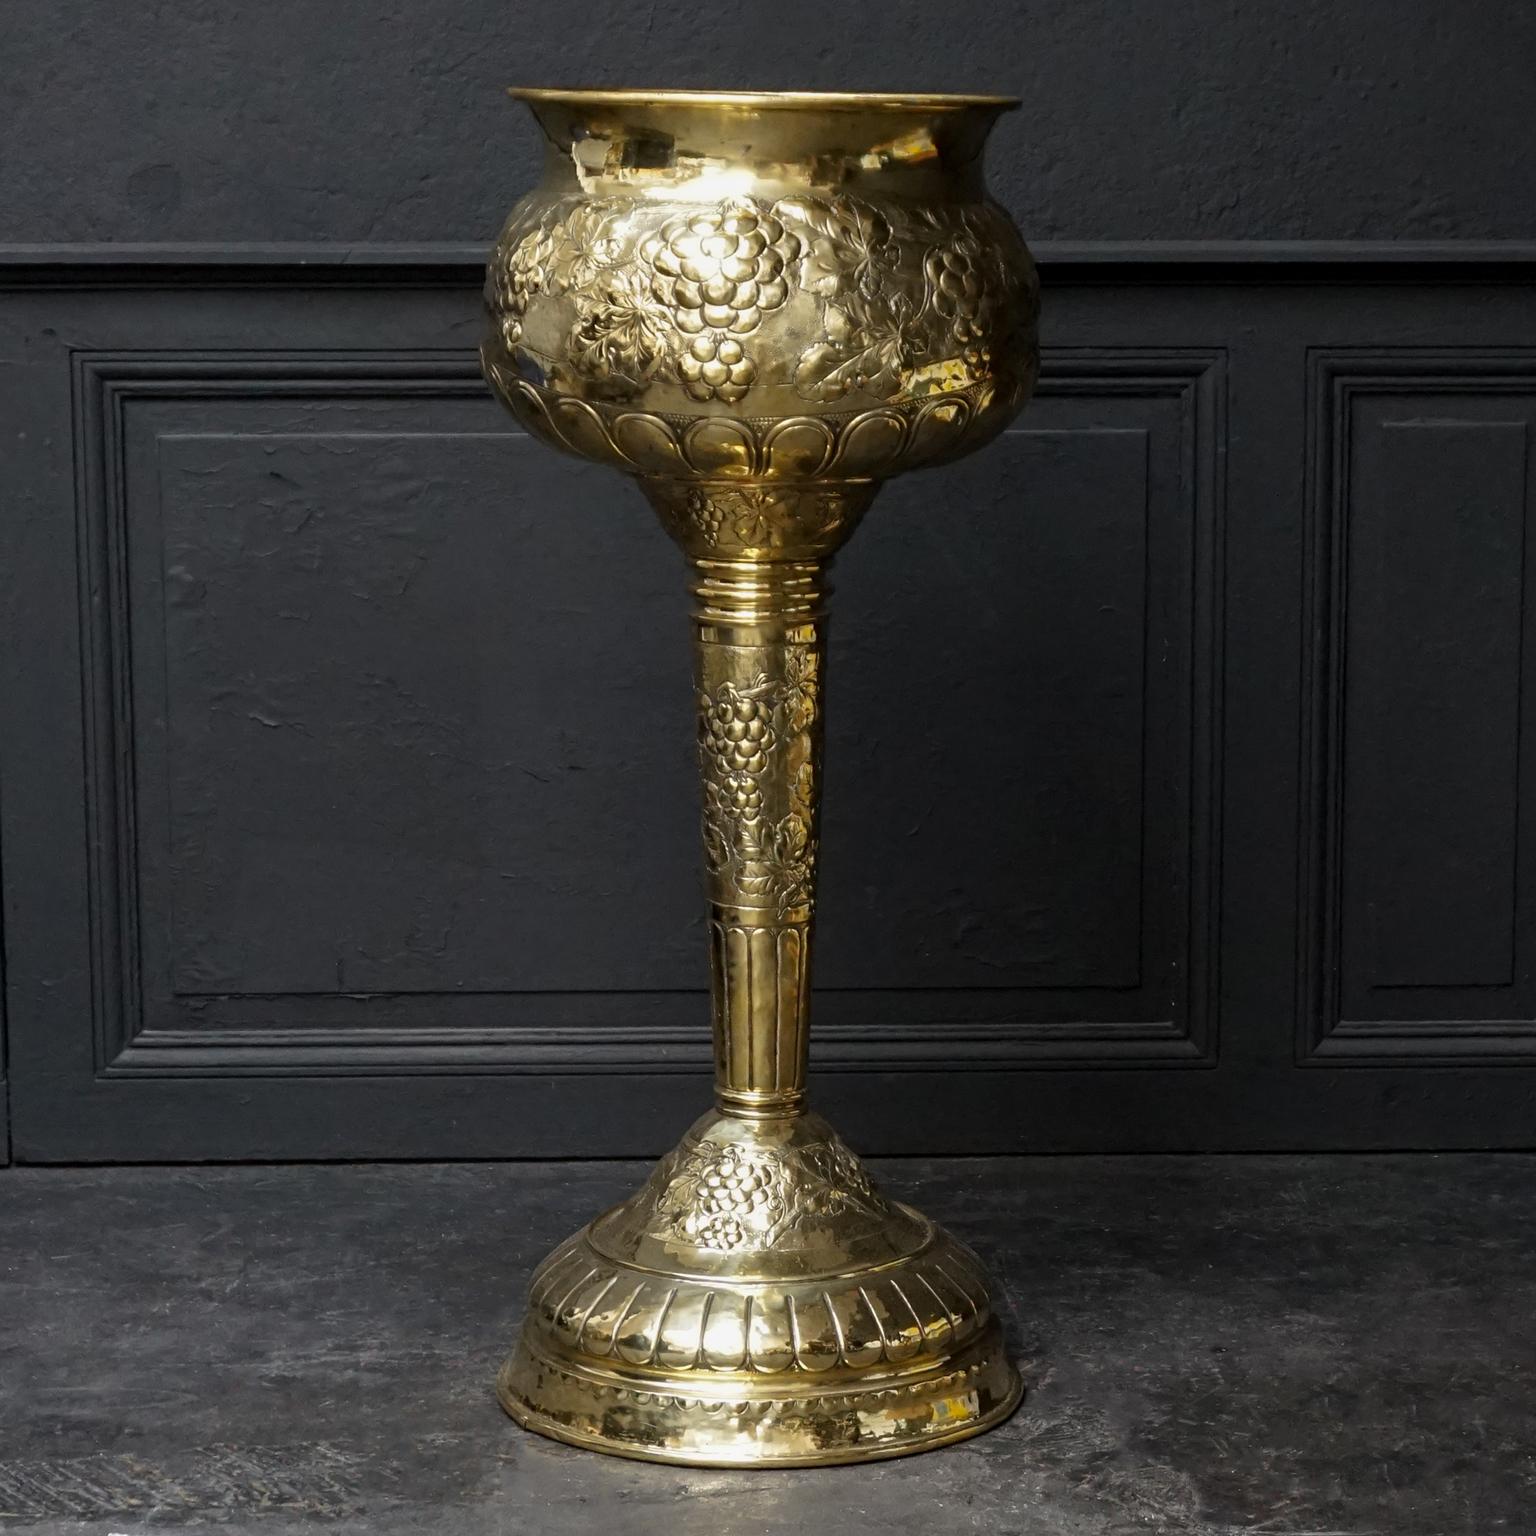 A very large, oversized hand-hammered brass cachepot or on a high leg, also usable as Champagne ice bucket
The leg and the bulbous repoussé body are decorated with hammered bunches of grapes, grape leaves and stylish decorations. 
In the middle of